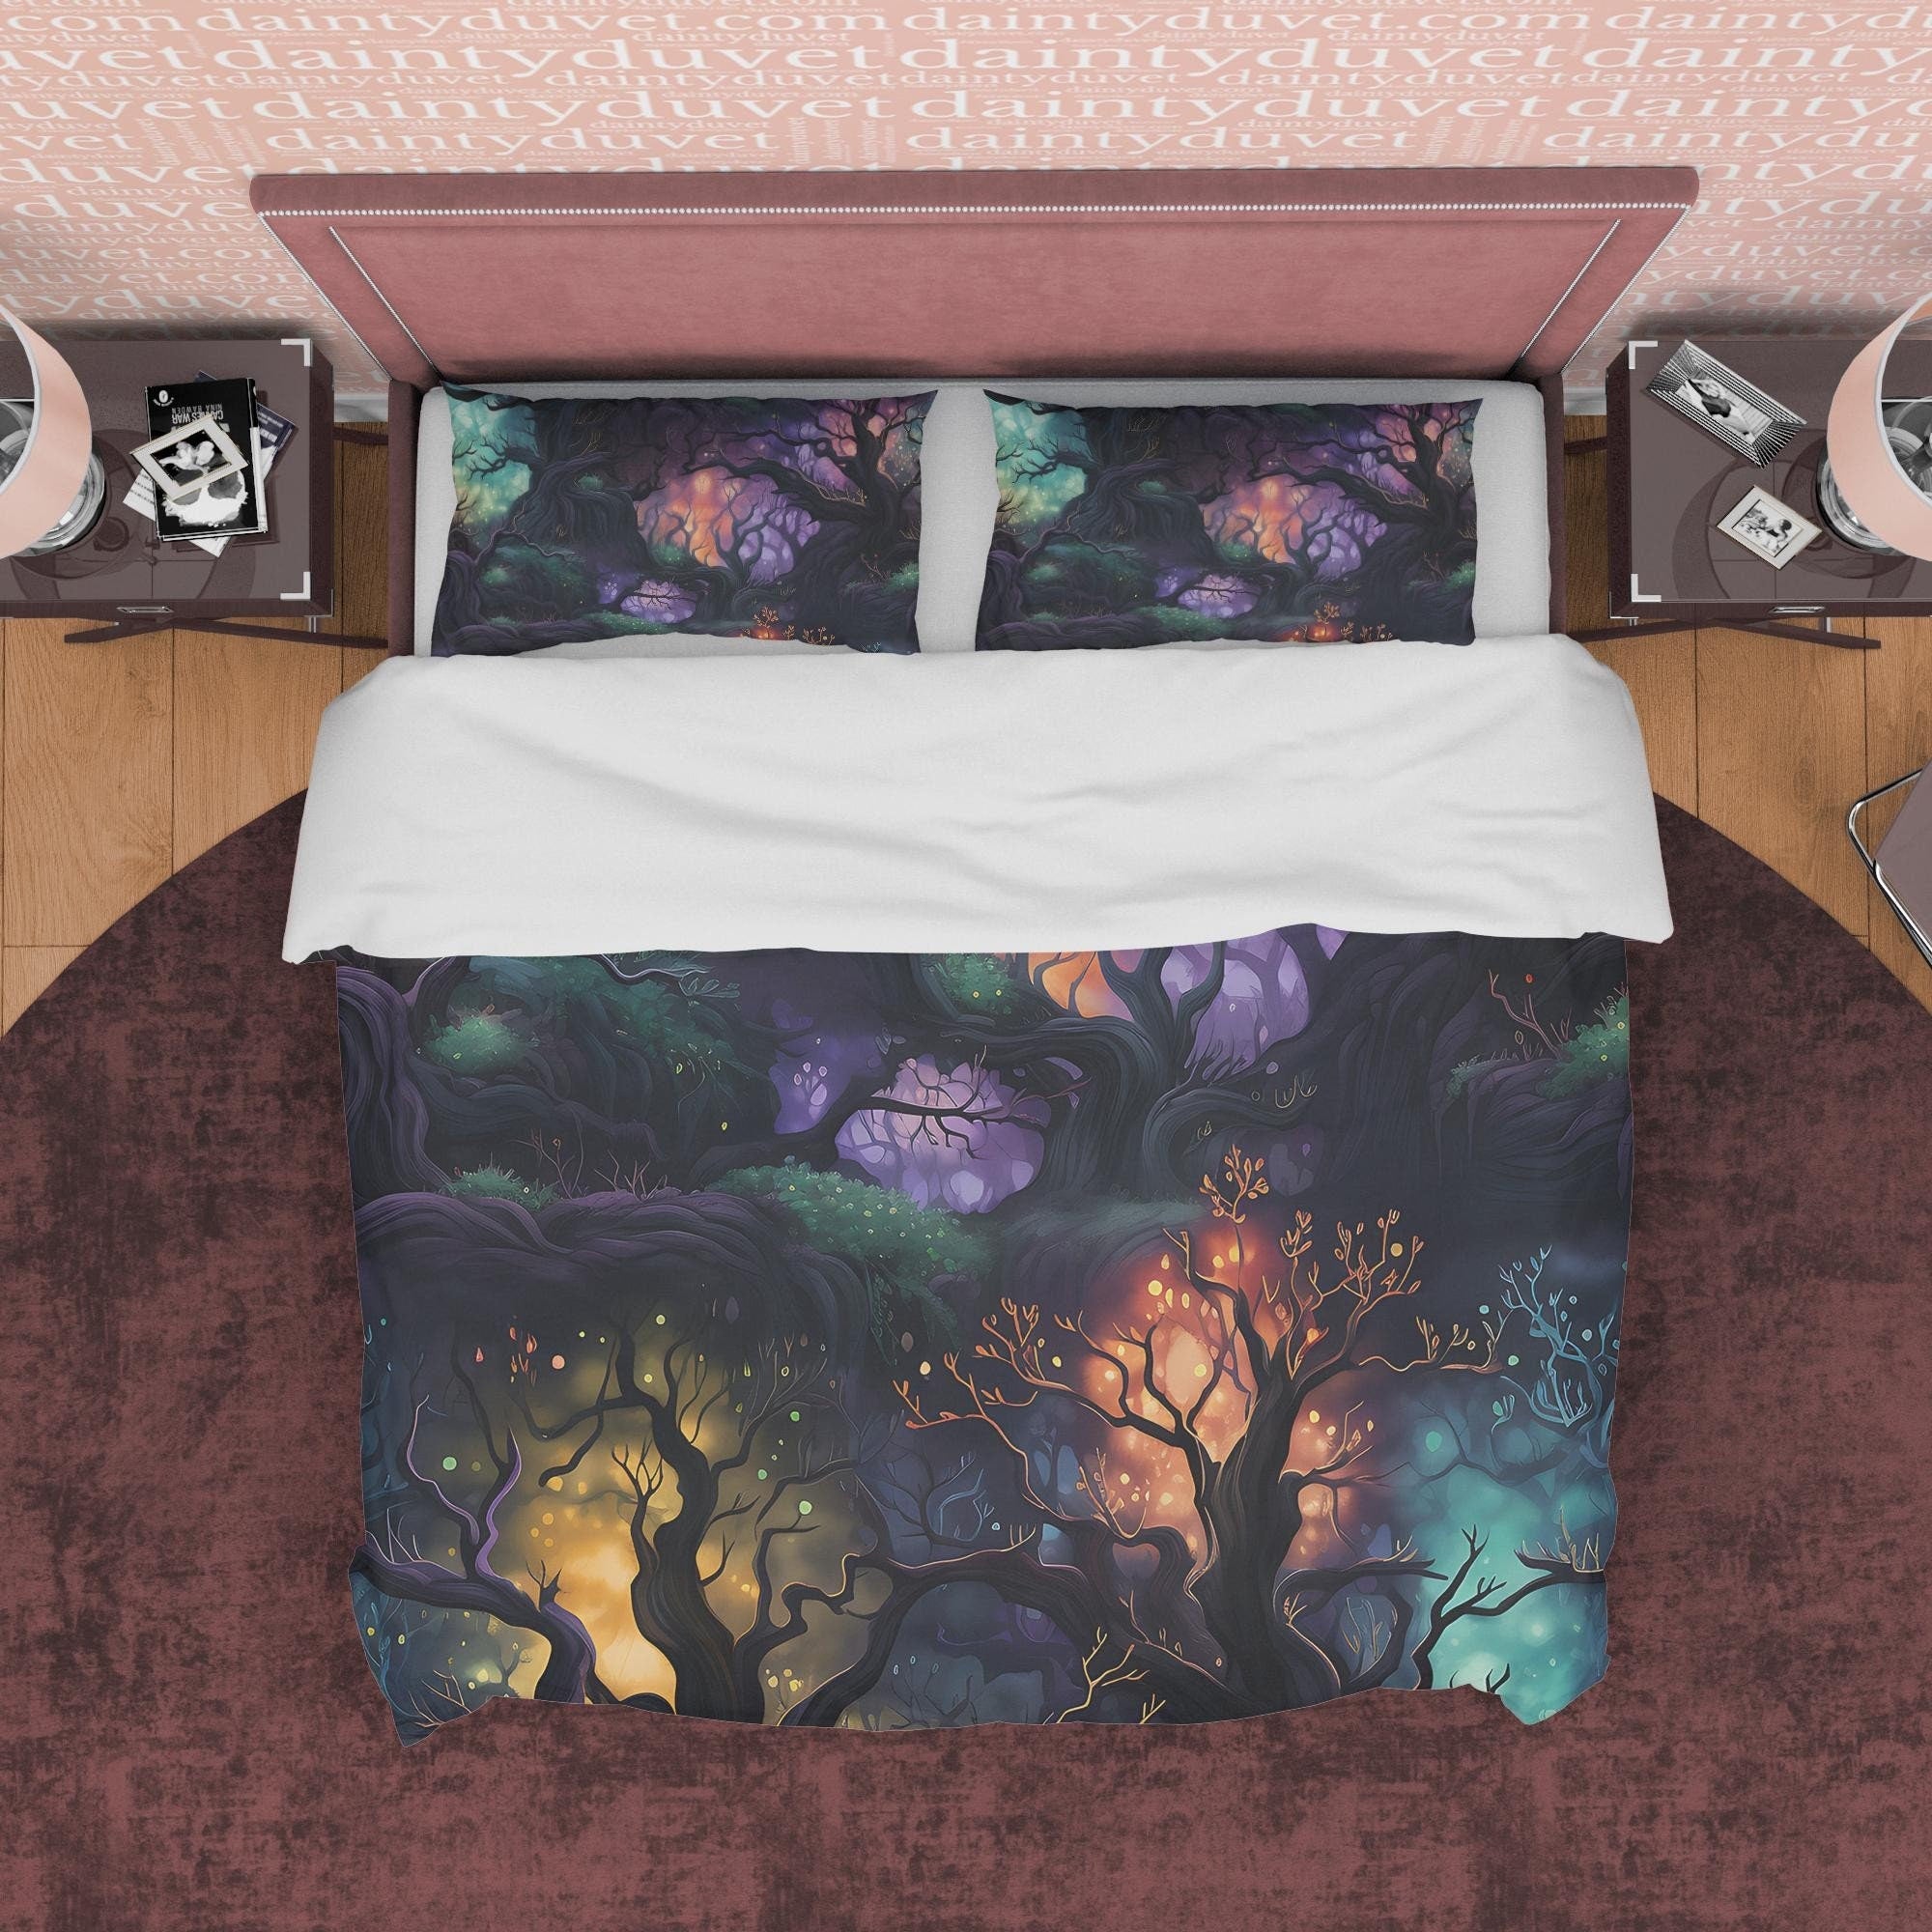 Enchanted Forest with Colorful Lights, Halloween Duvet Cover Set, Aesthetic Bedding, Spooky Room Decor, US, European, Australian Sizes